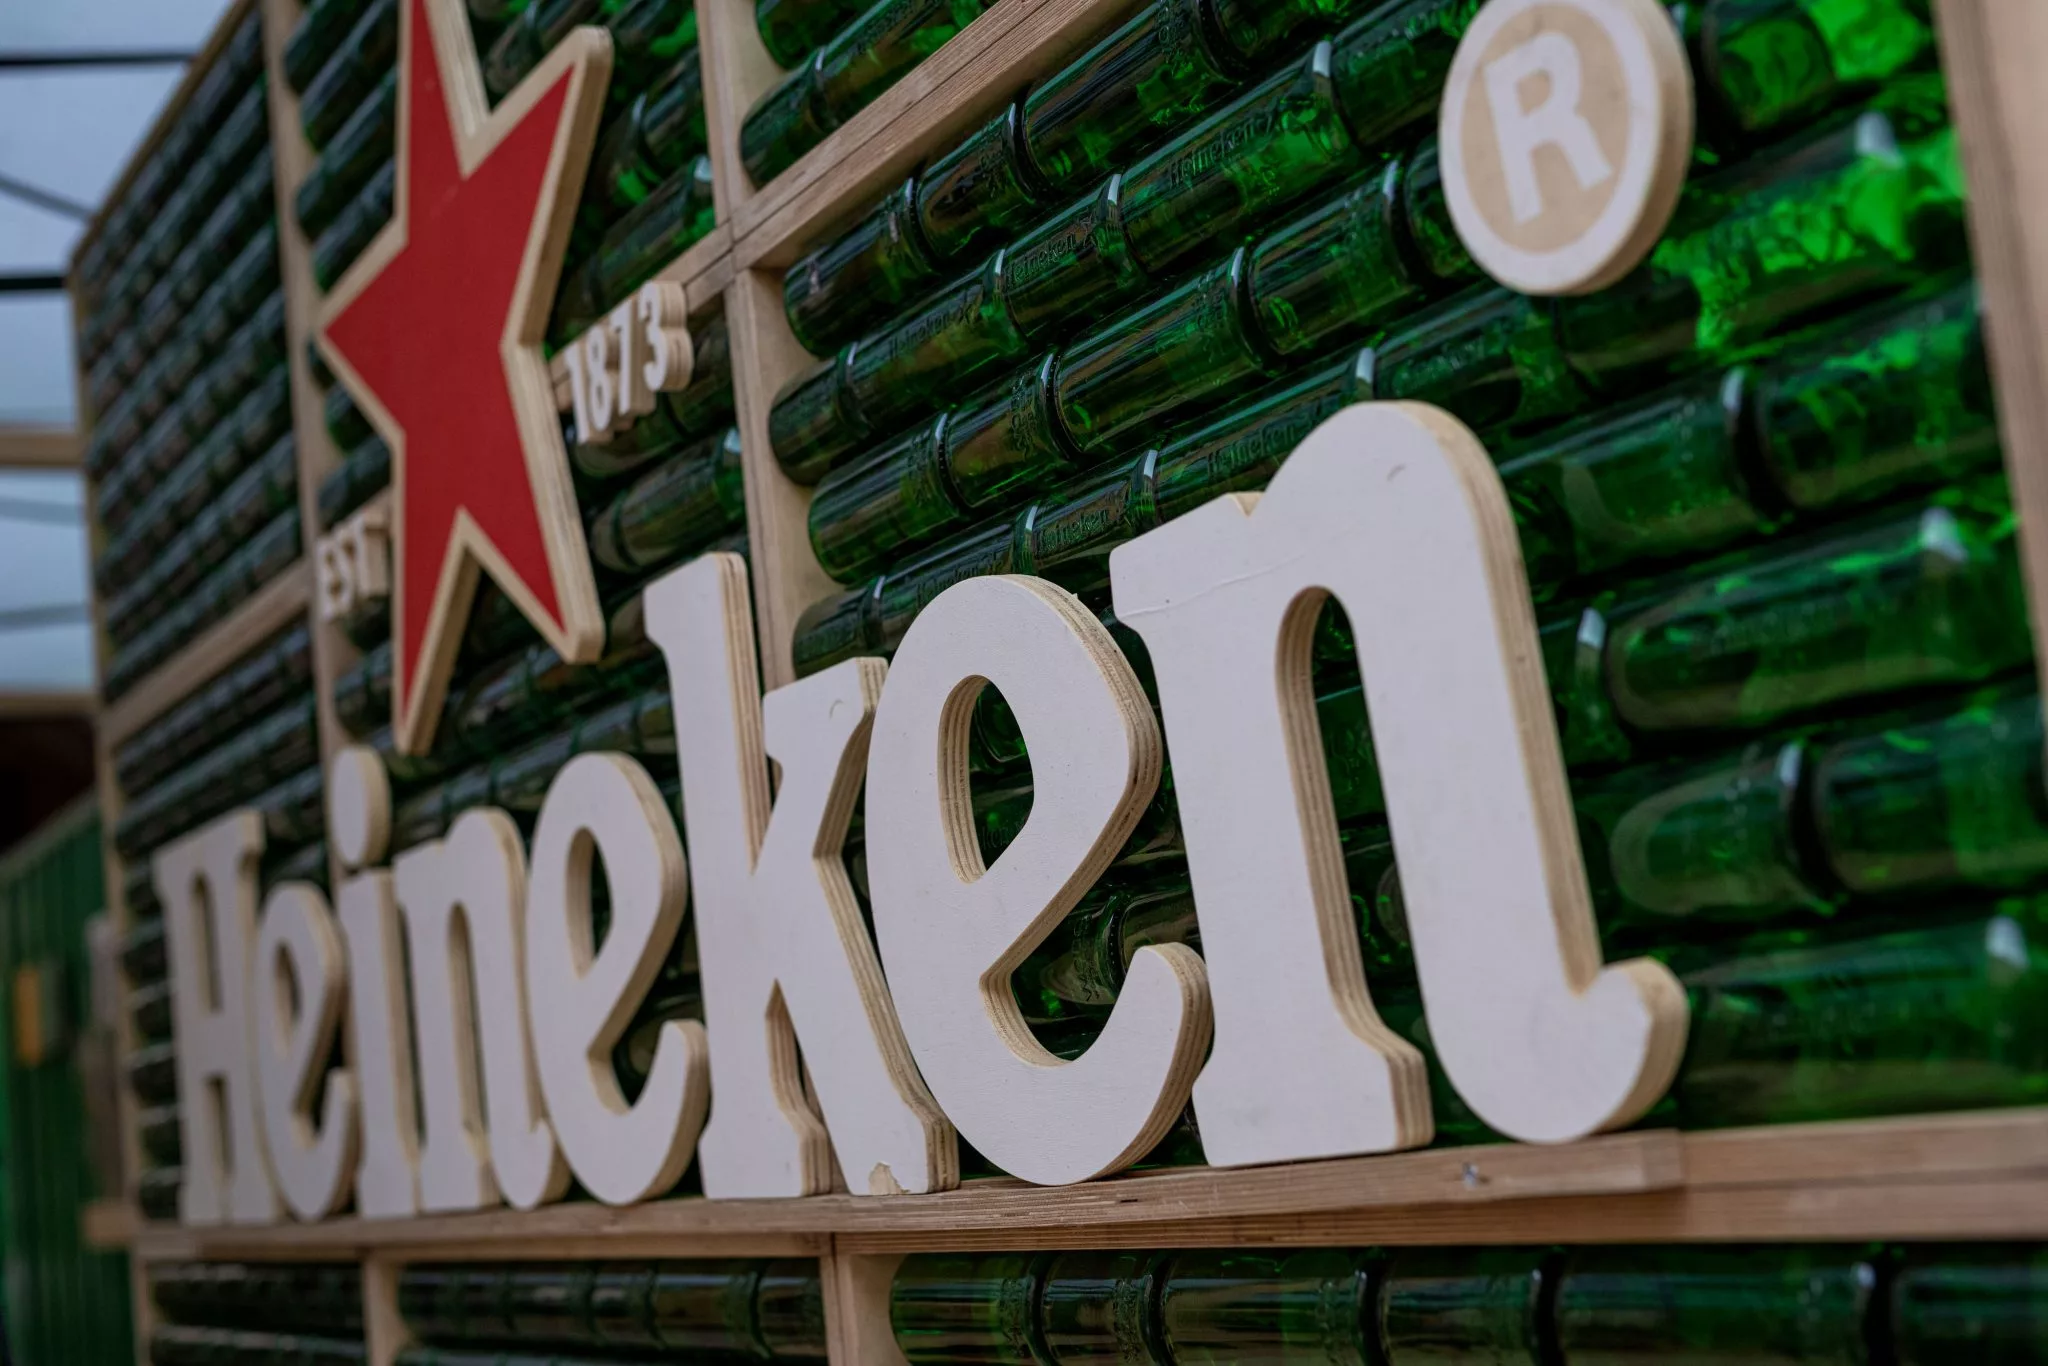 A wall made from stacks of green beer bottles